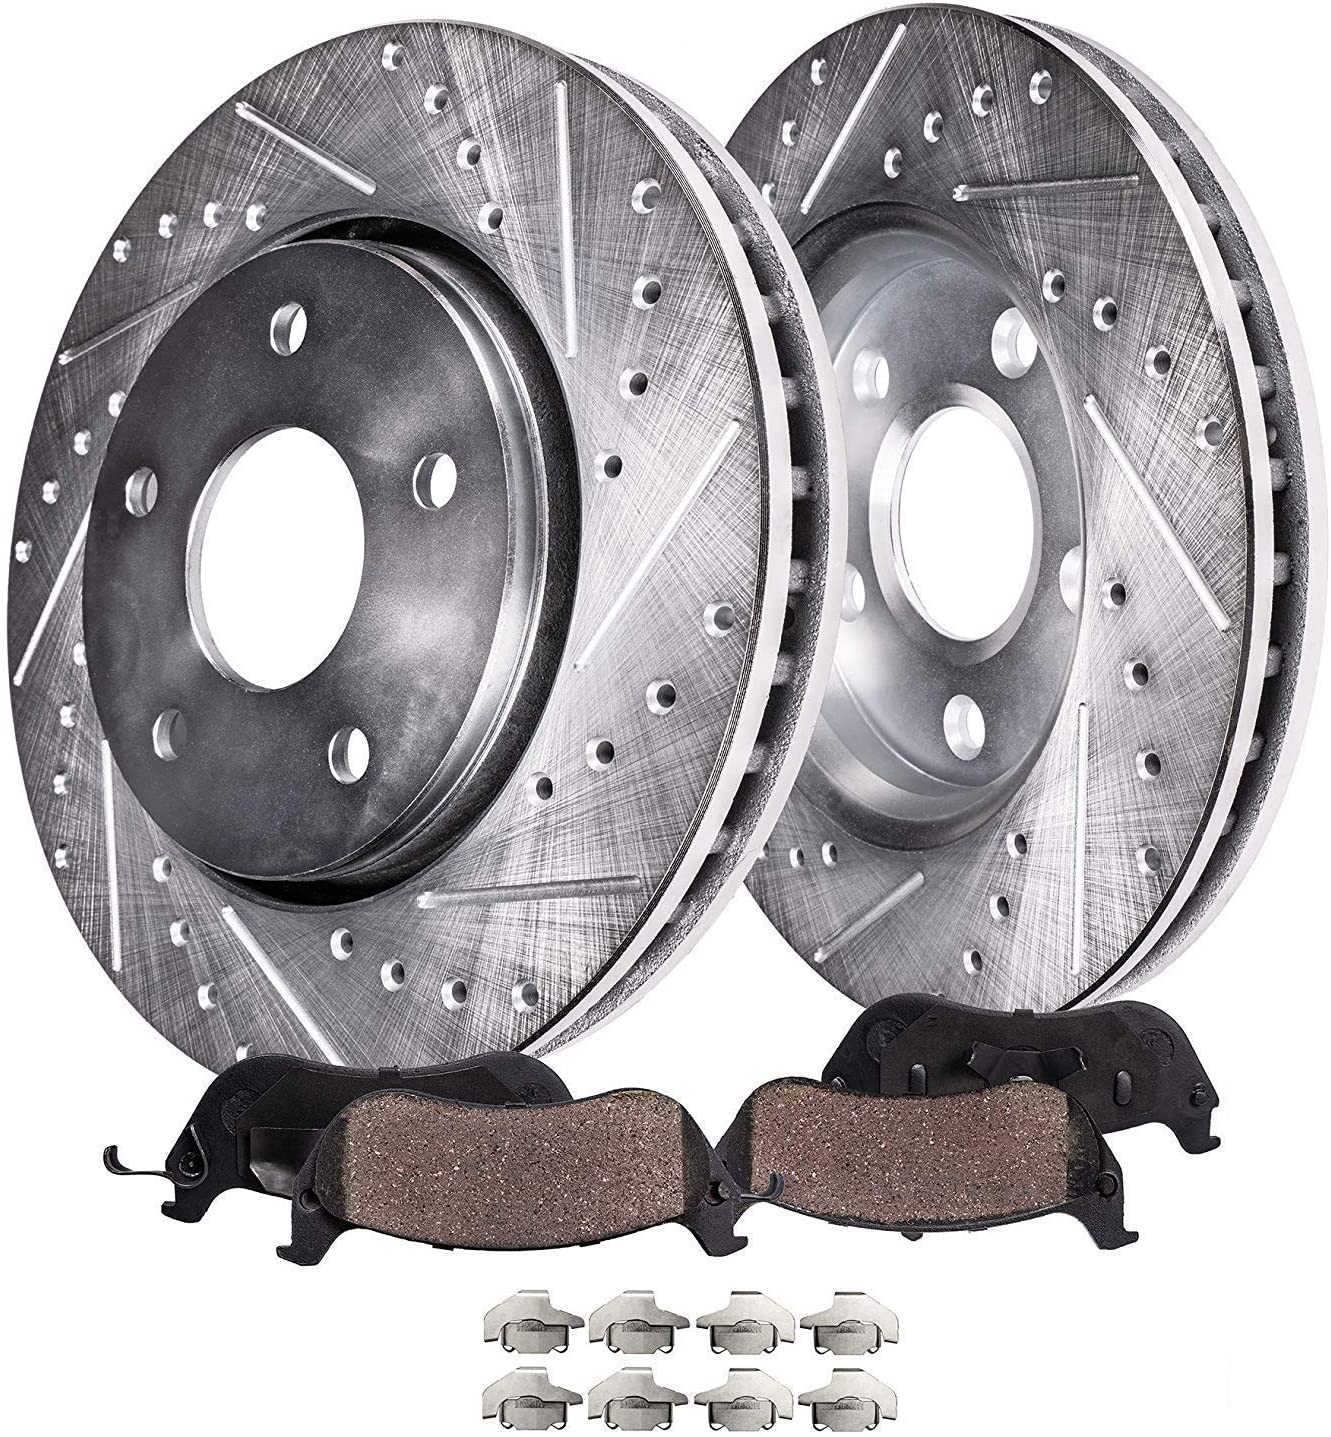 Detroit Axle - 300MM Front Drilled & Slotted Replacement Brake Kit Rotors Ceramic Pads for 2001-2003 Acura CL - [1999-2008 TL] - 2004-2010 TSX - [2003-2011 Honda Accord] - See Fitment